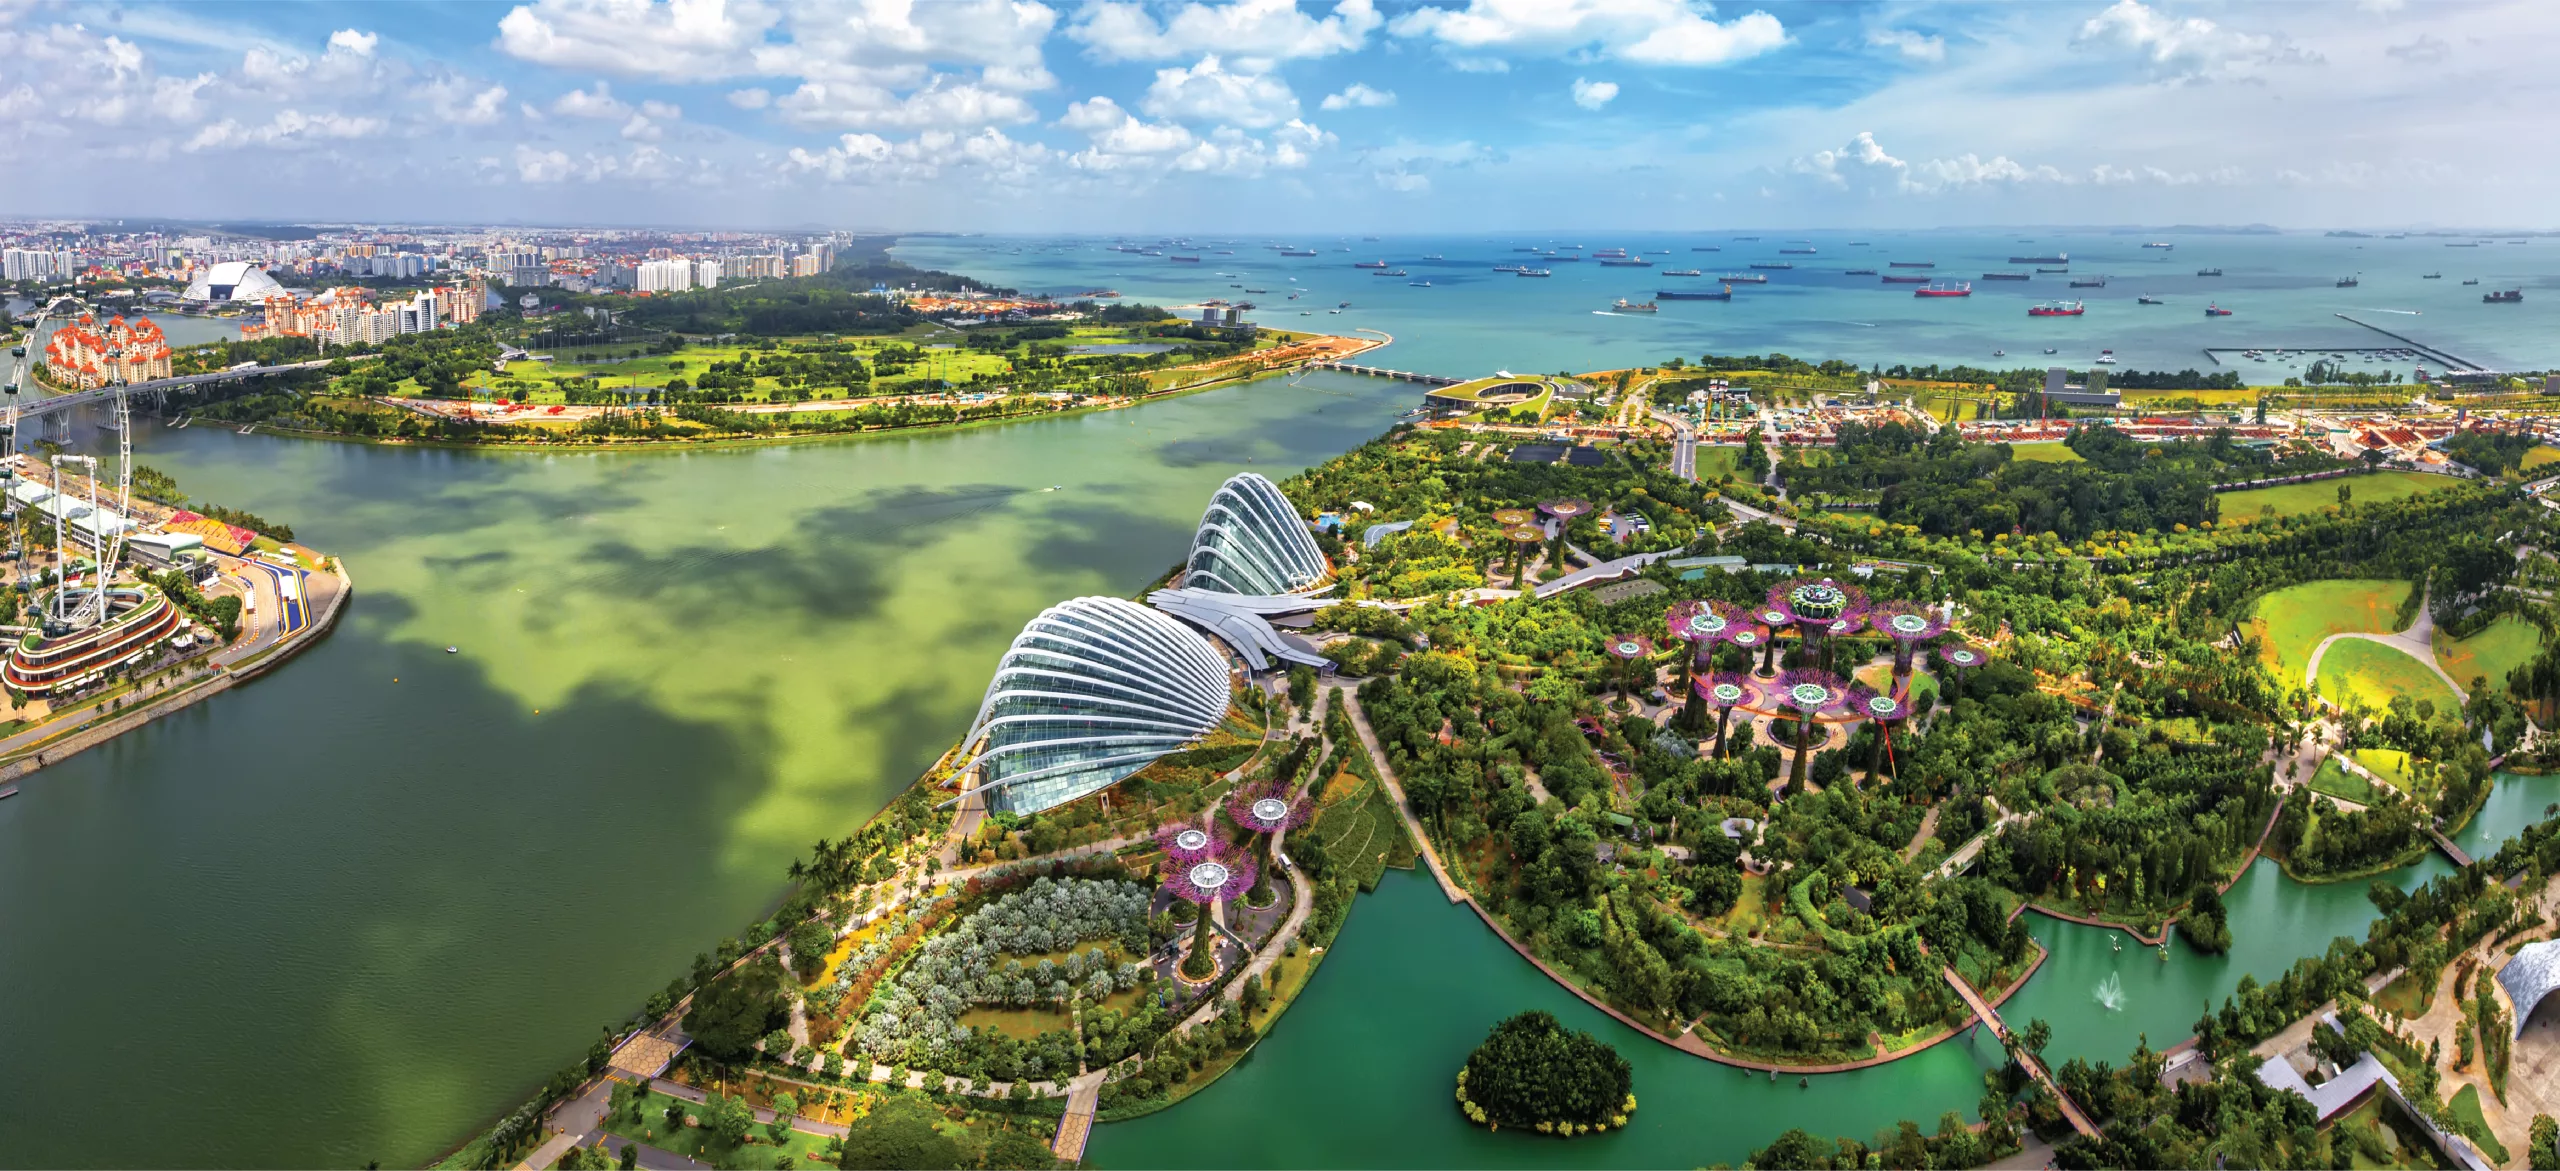 Singapore – Gardens by the Bay, the best garden attraction of South East Asia